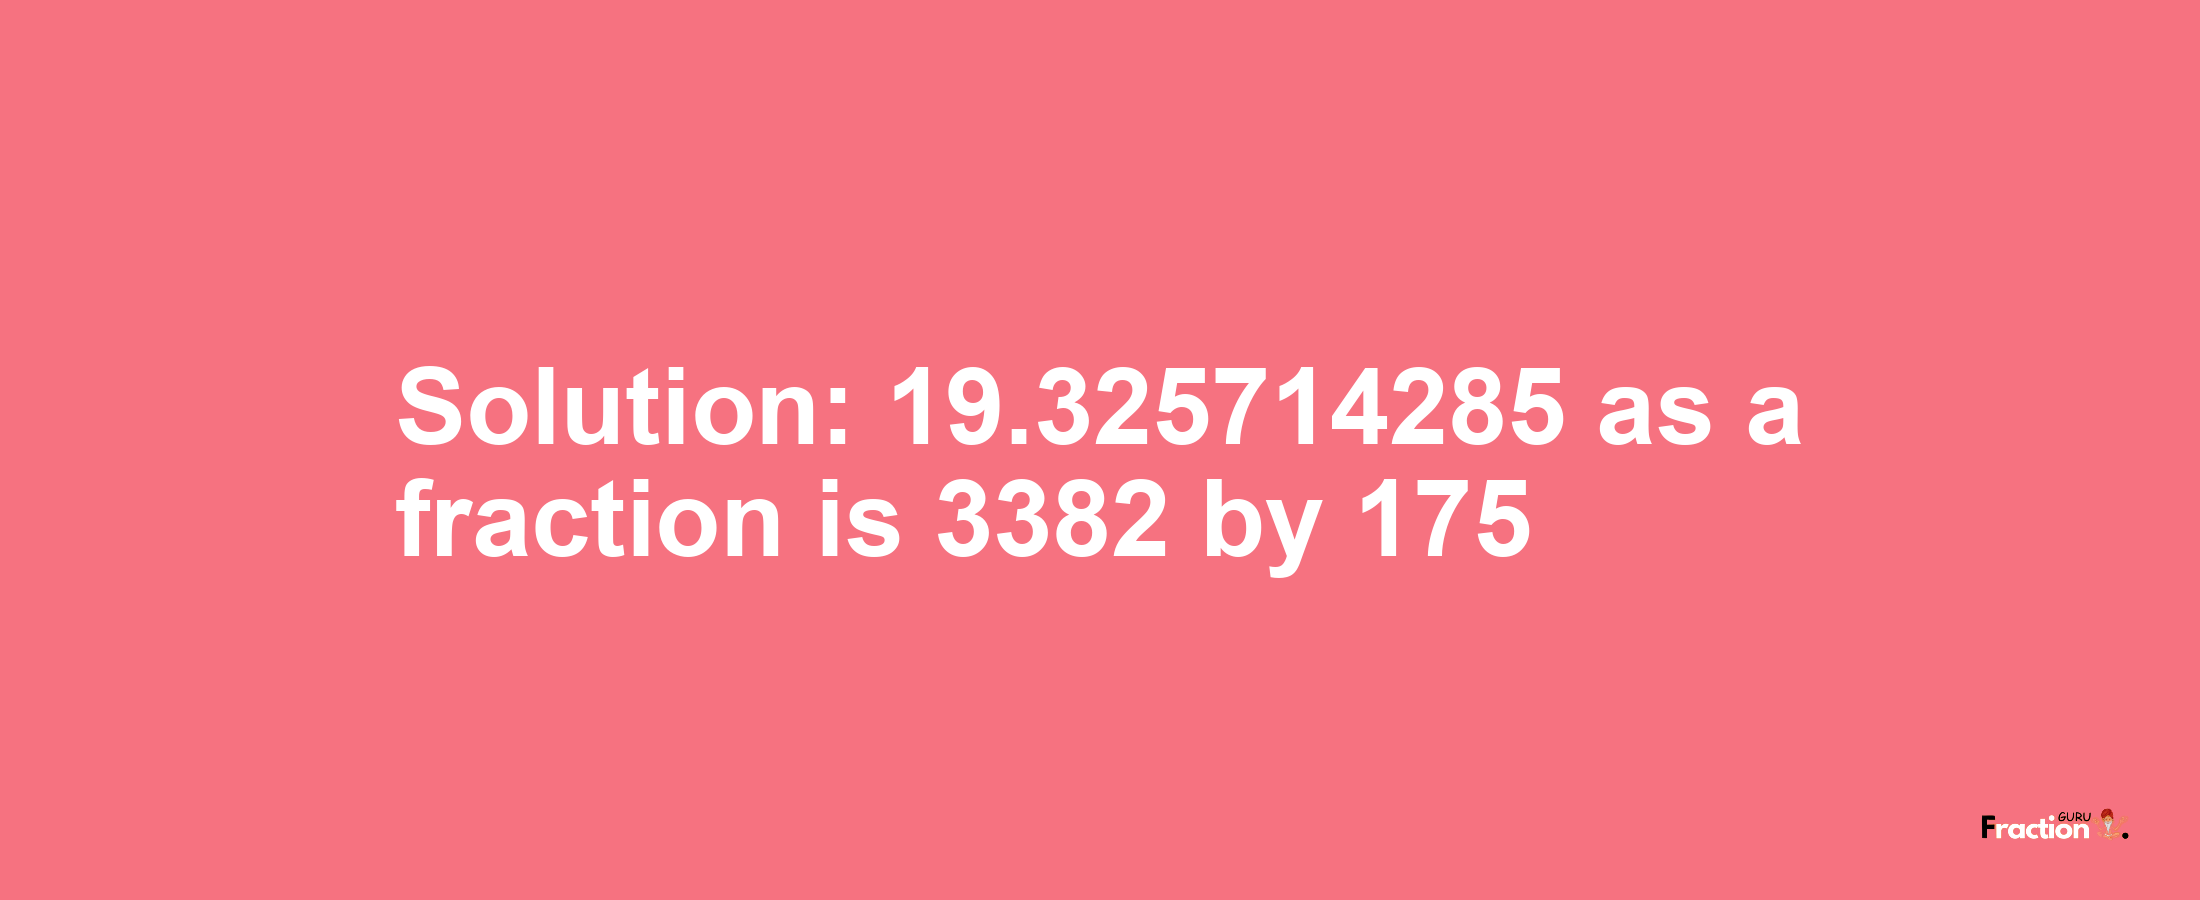 Solution:19.325714285 as a fraction is 3382/175